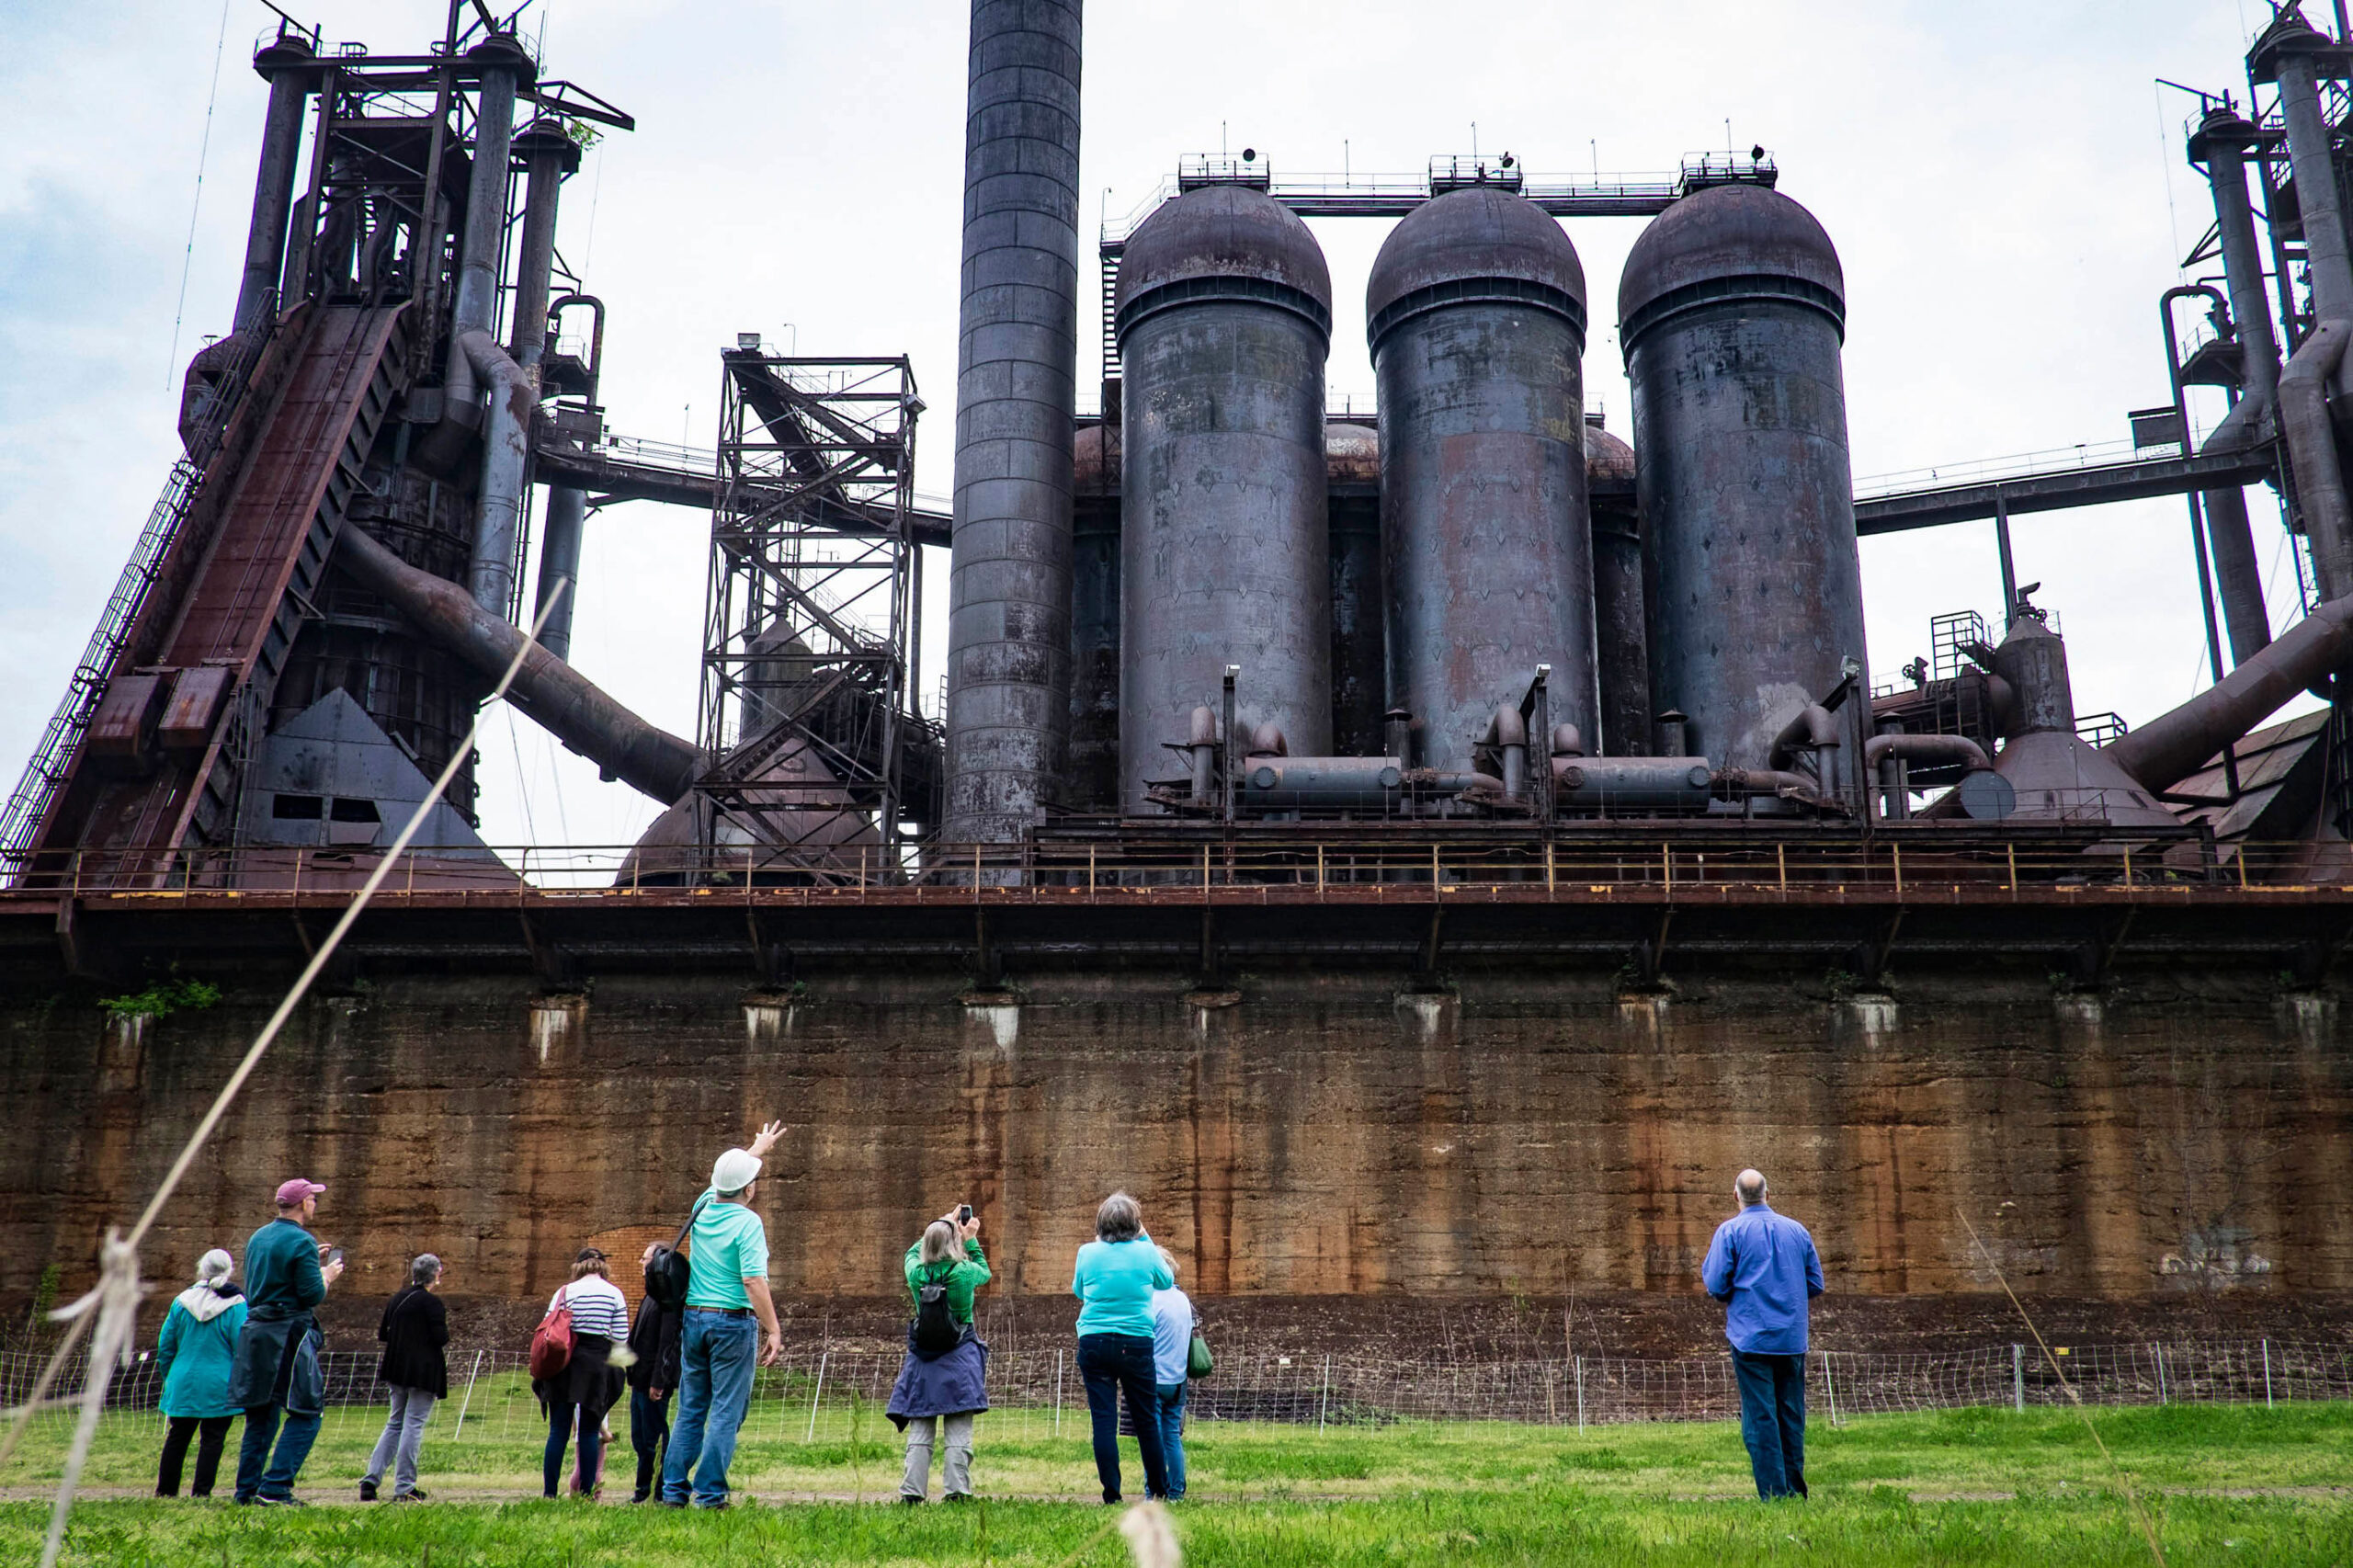 A retired steel worker gives a tour at his former work site at the Carrie Furnaces in Rankin, Pennsylvania.